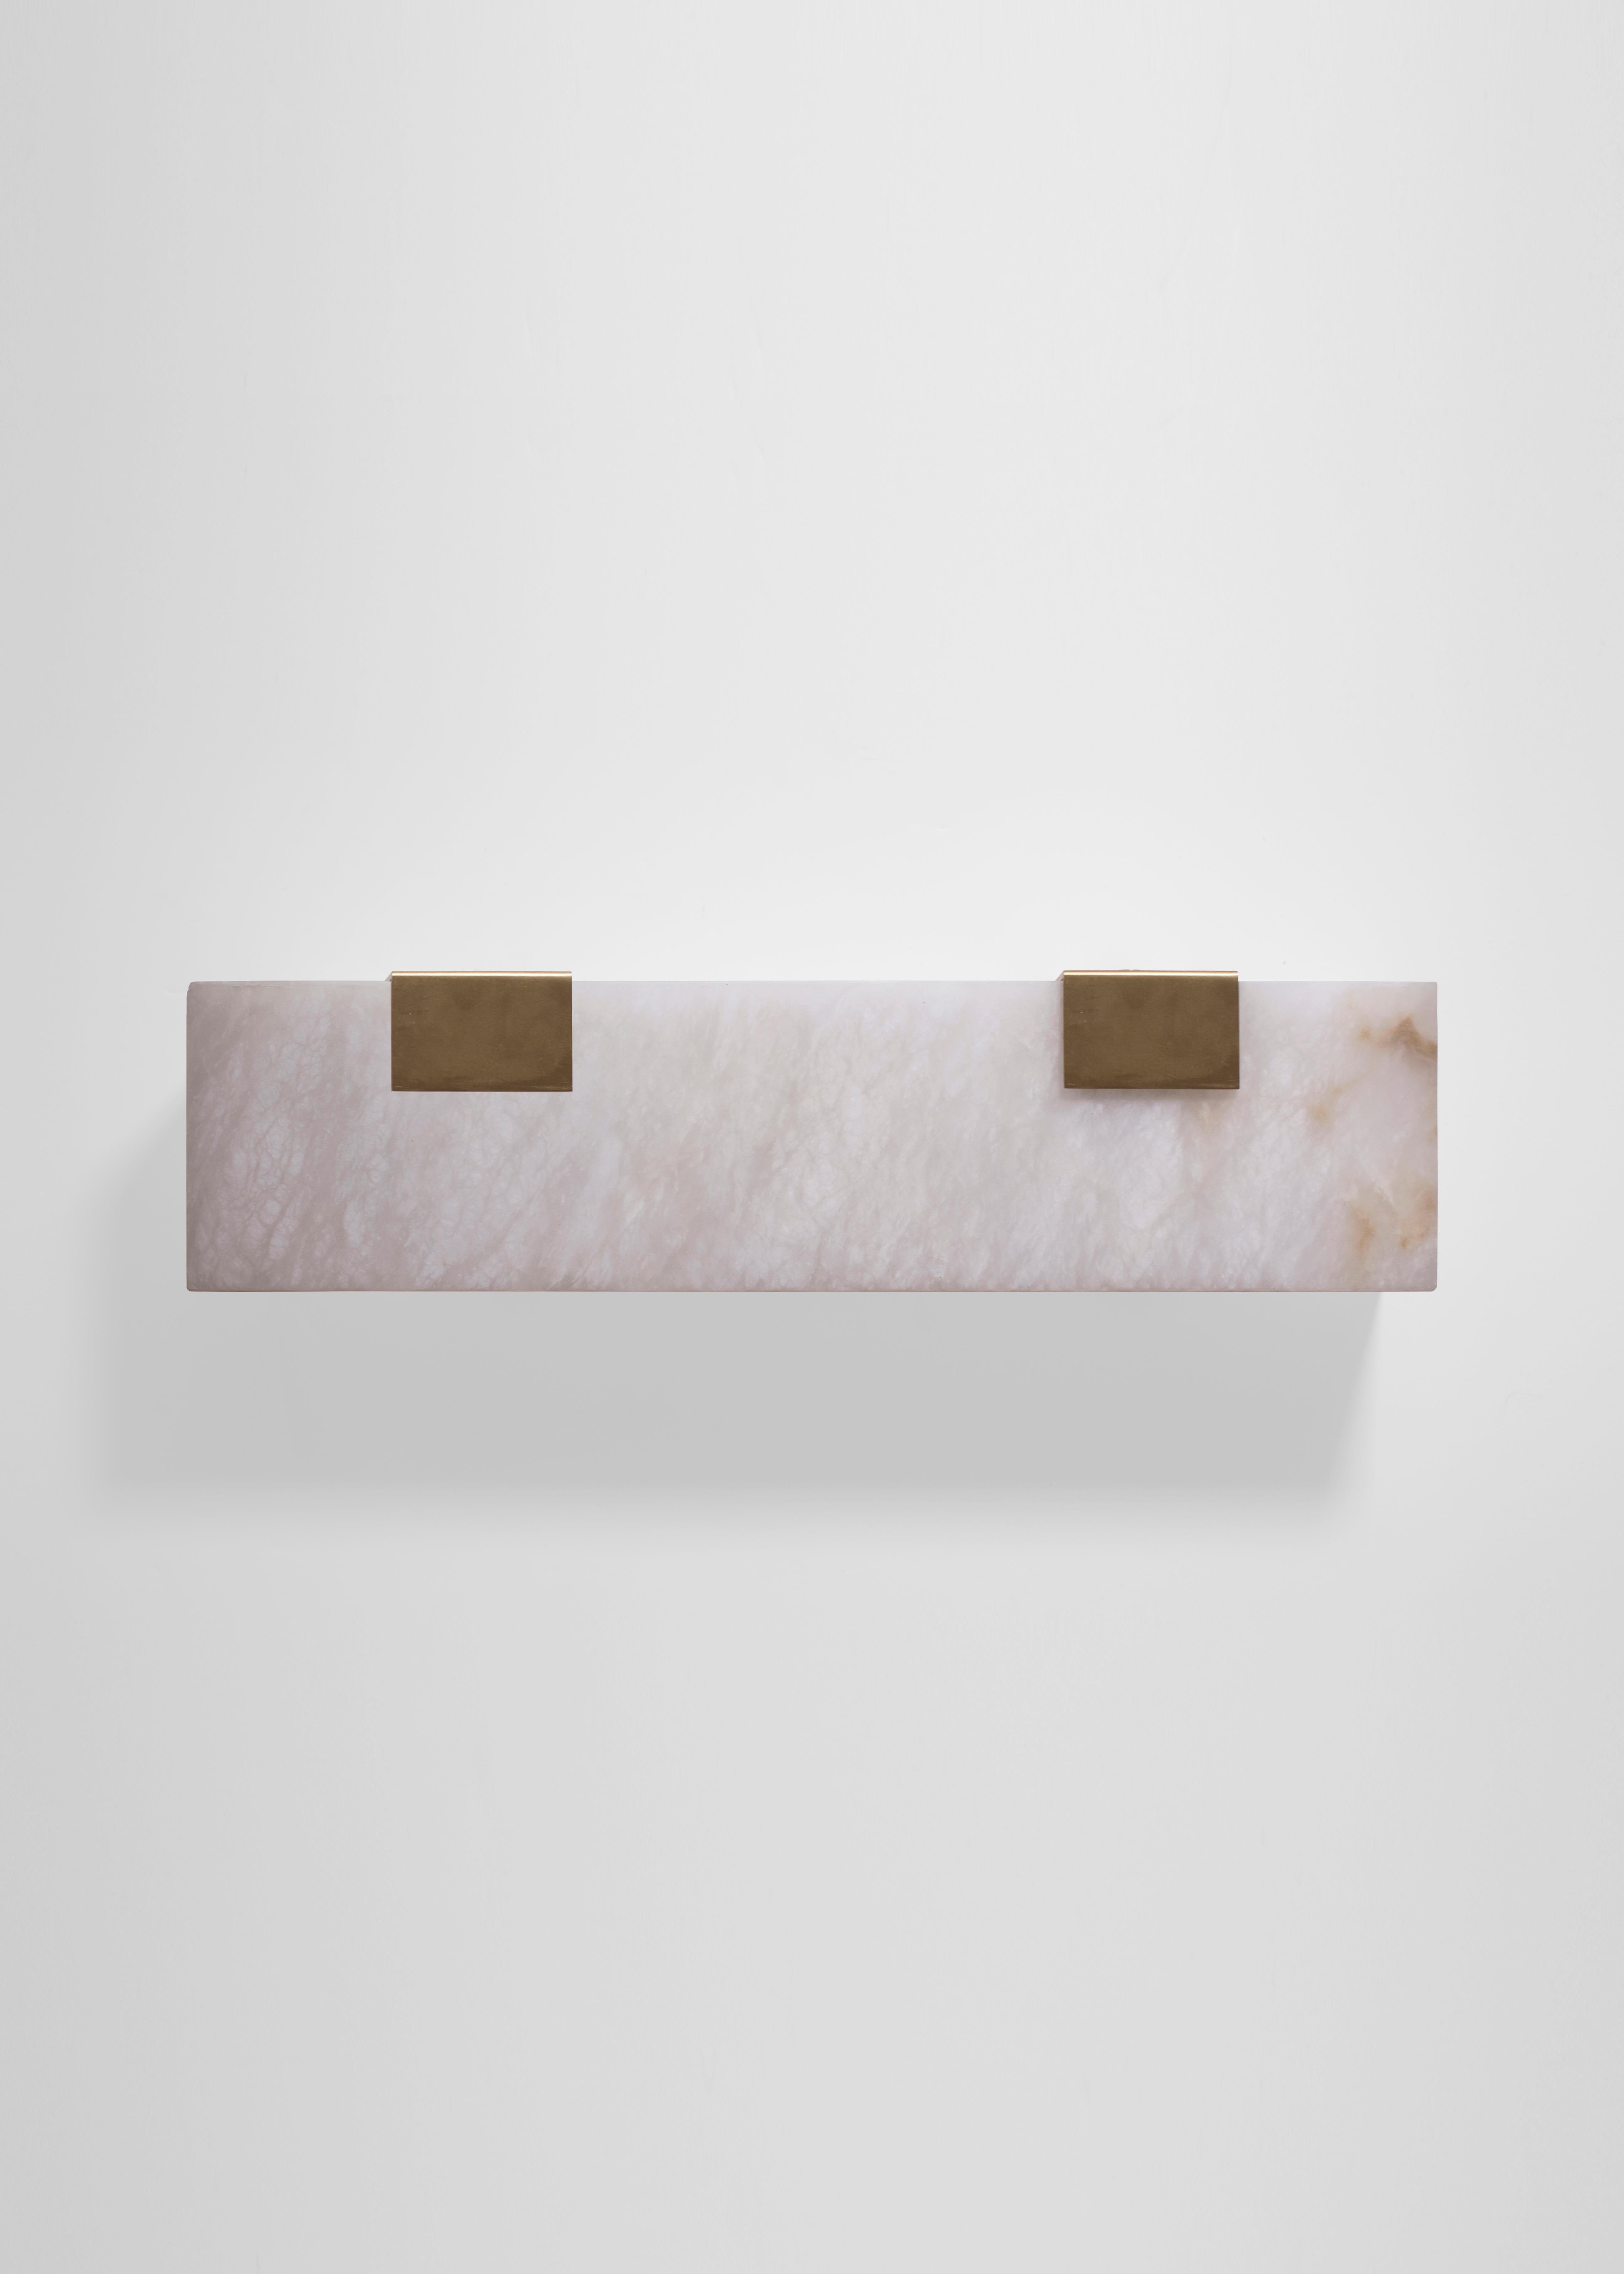 Orphan Work 003-2C Sconce, 2018
Shown in brushed brass and alabaster
Available in brushed brass, brushed nickel and blackened brass
Measures: 5 1/4”H x 19”W x 3 7/8”D
Wall or ceiling mount
Vertical or horizontal
Plug-in by request
1-4 adjustable